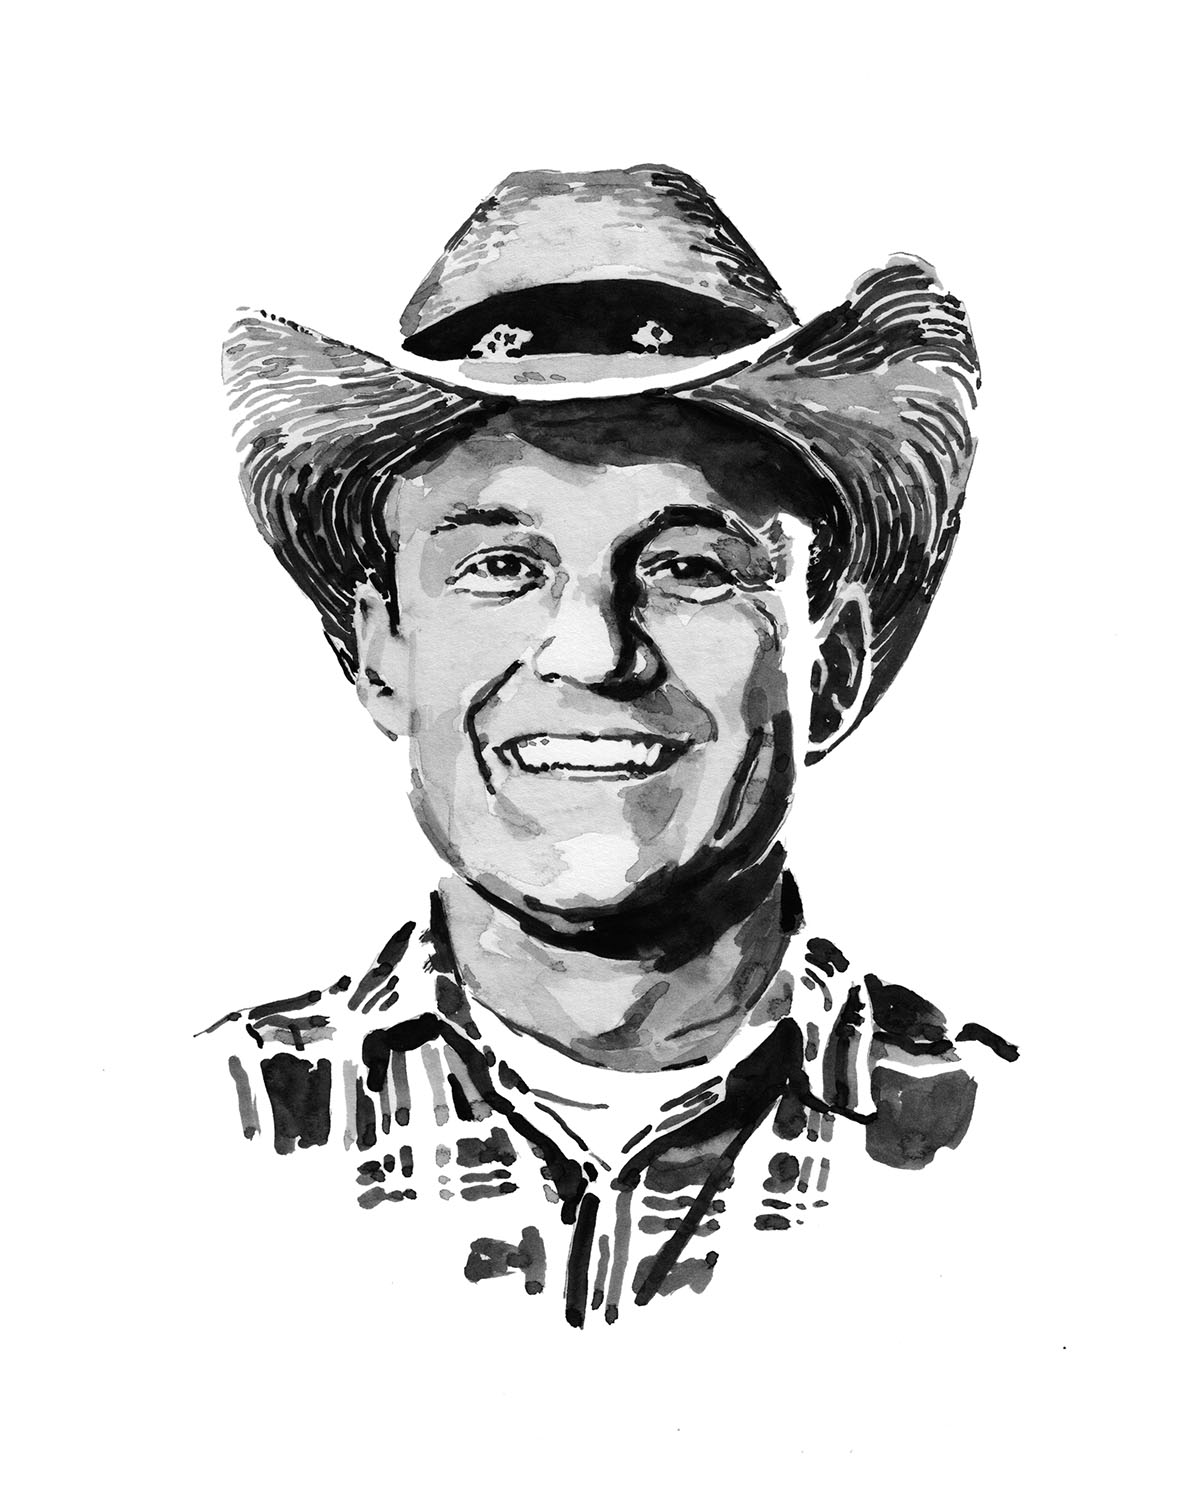 A black and white illustration of a man in a cowboy hat